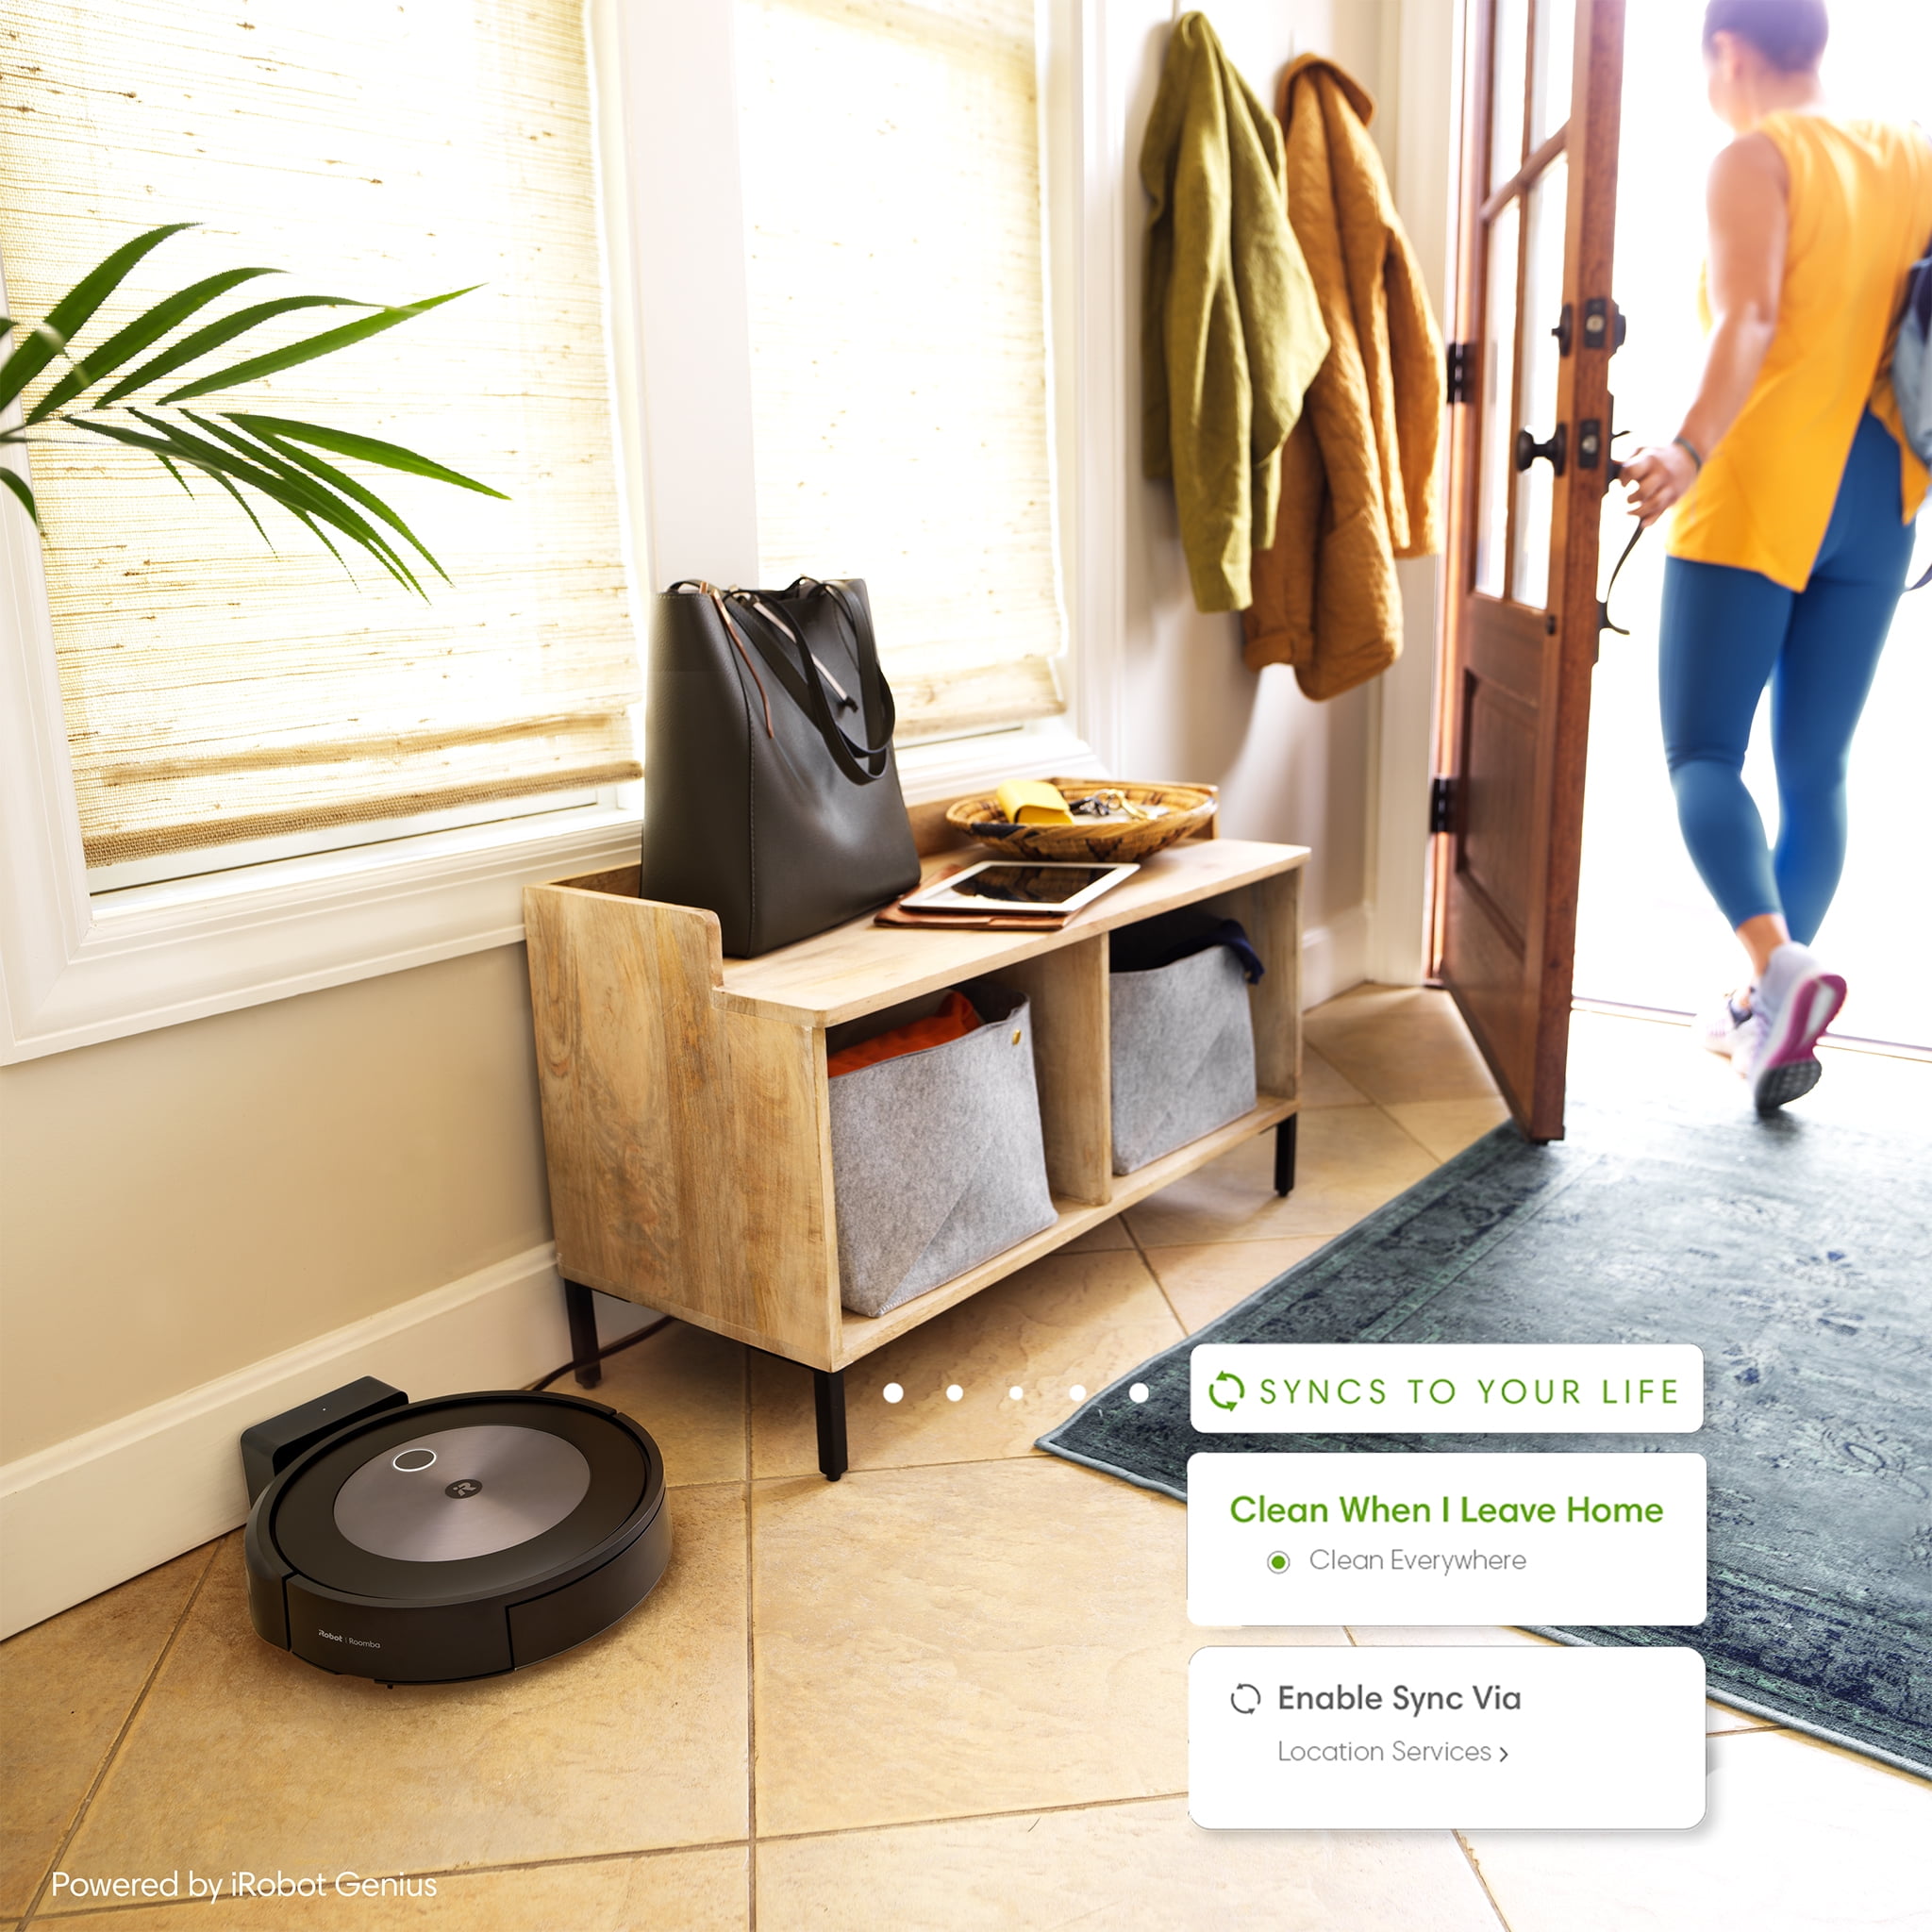 iRobot® Roomba® j7 (7150) Wi-Fi® Connected Robot Vacuum - Identifies and obstacles like pet waste & cords, Mapping, Works with Google, Ideal for Pet Hair, Carpets, Floors - Walmart.com